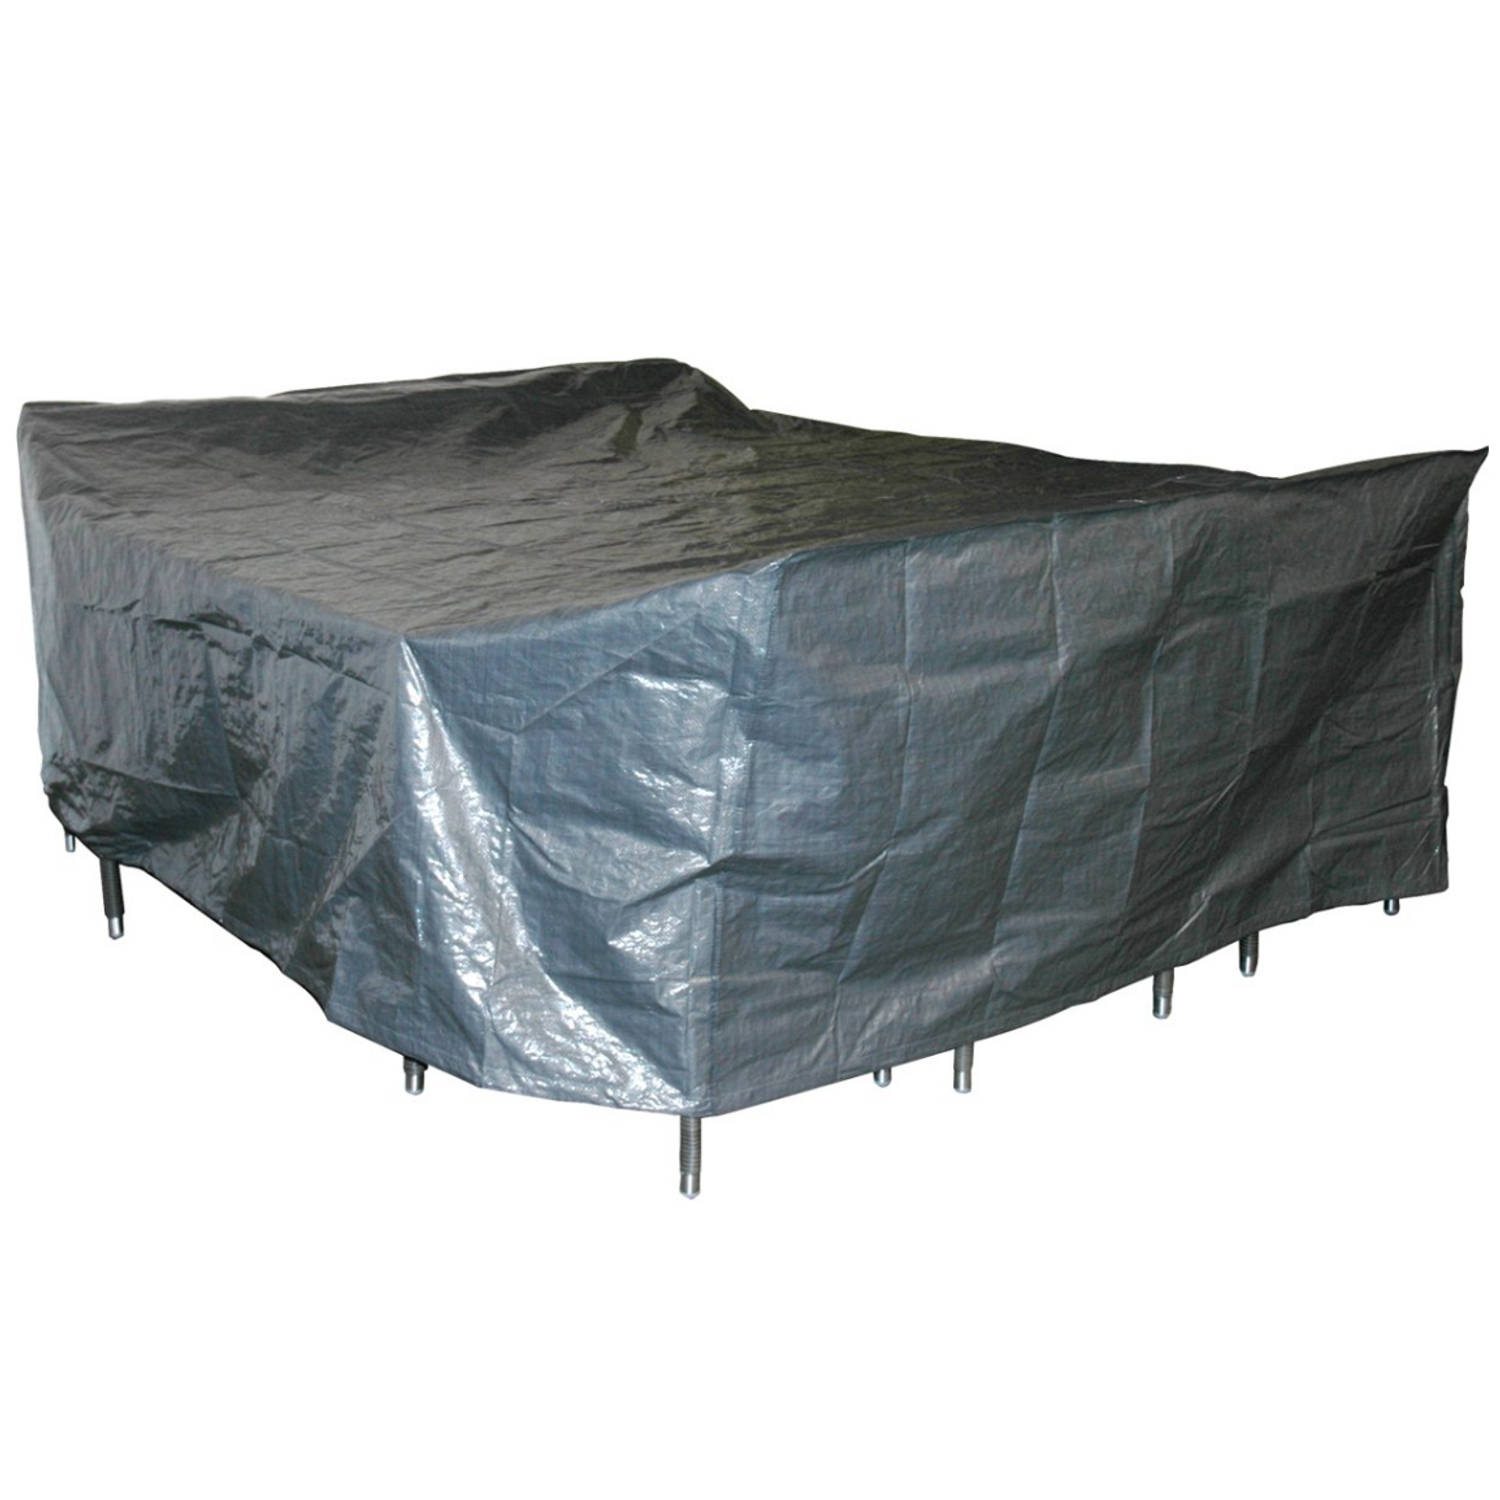 Beschermhoes Tuinmeubelen Tuinset 300x250x8 Tuinsethoes Label |